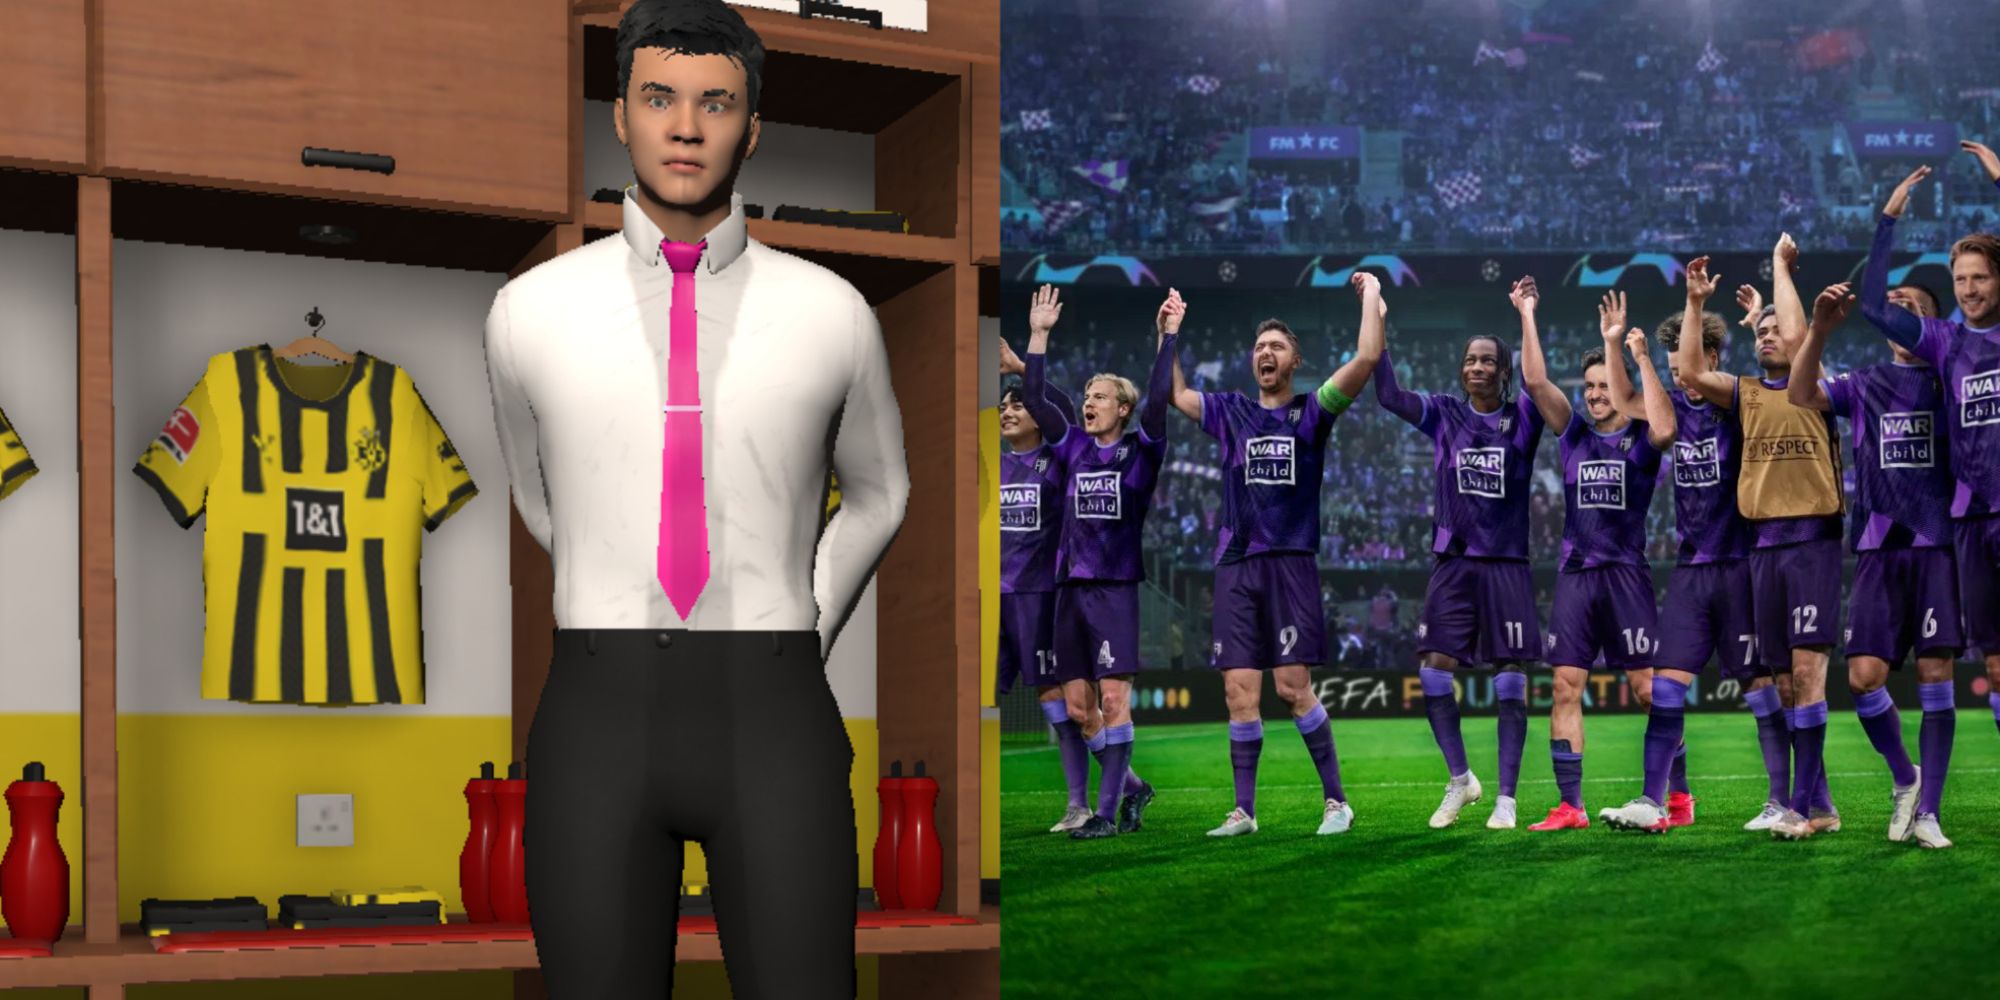 Football Manager 2023 Best Starting Teams Featured Split Image Of Dortmund Manager and FM23 Promo Picture